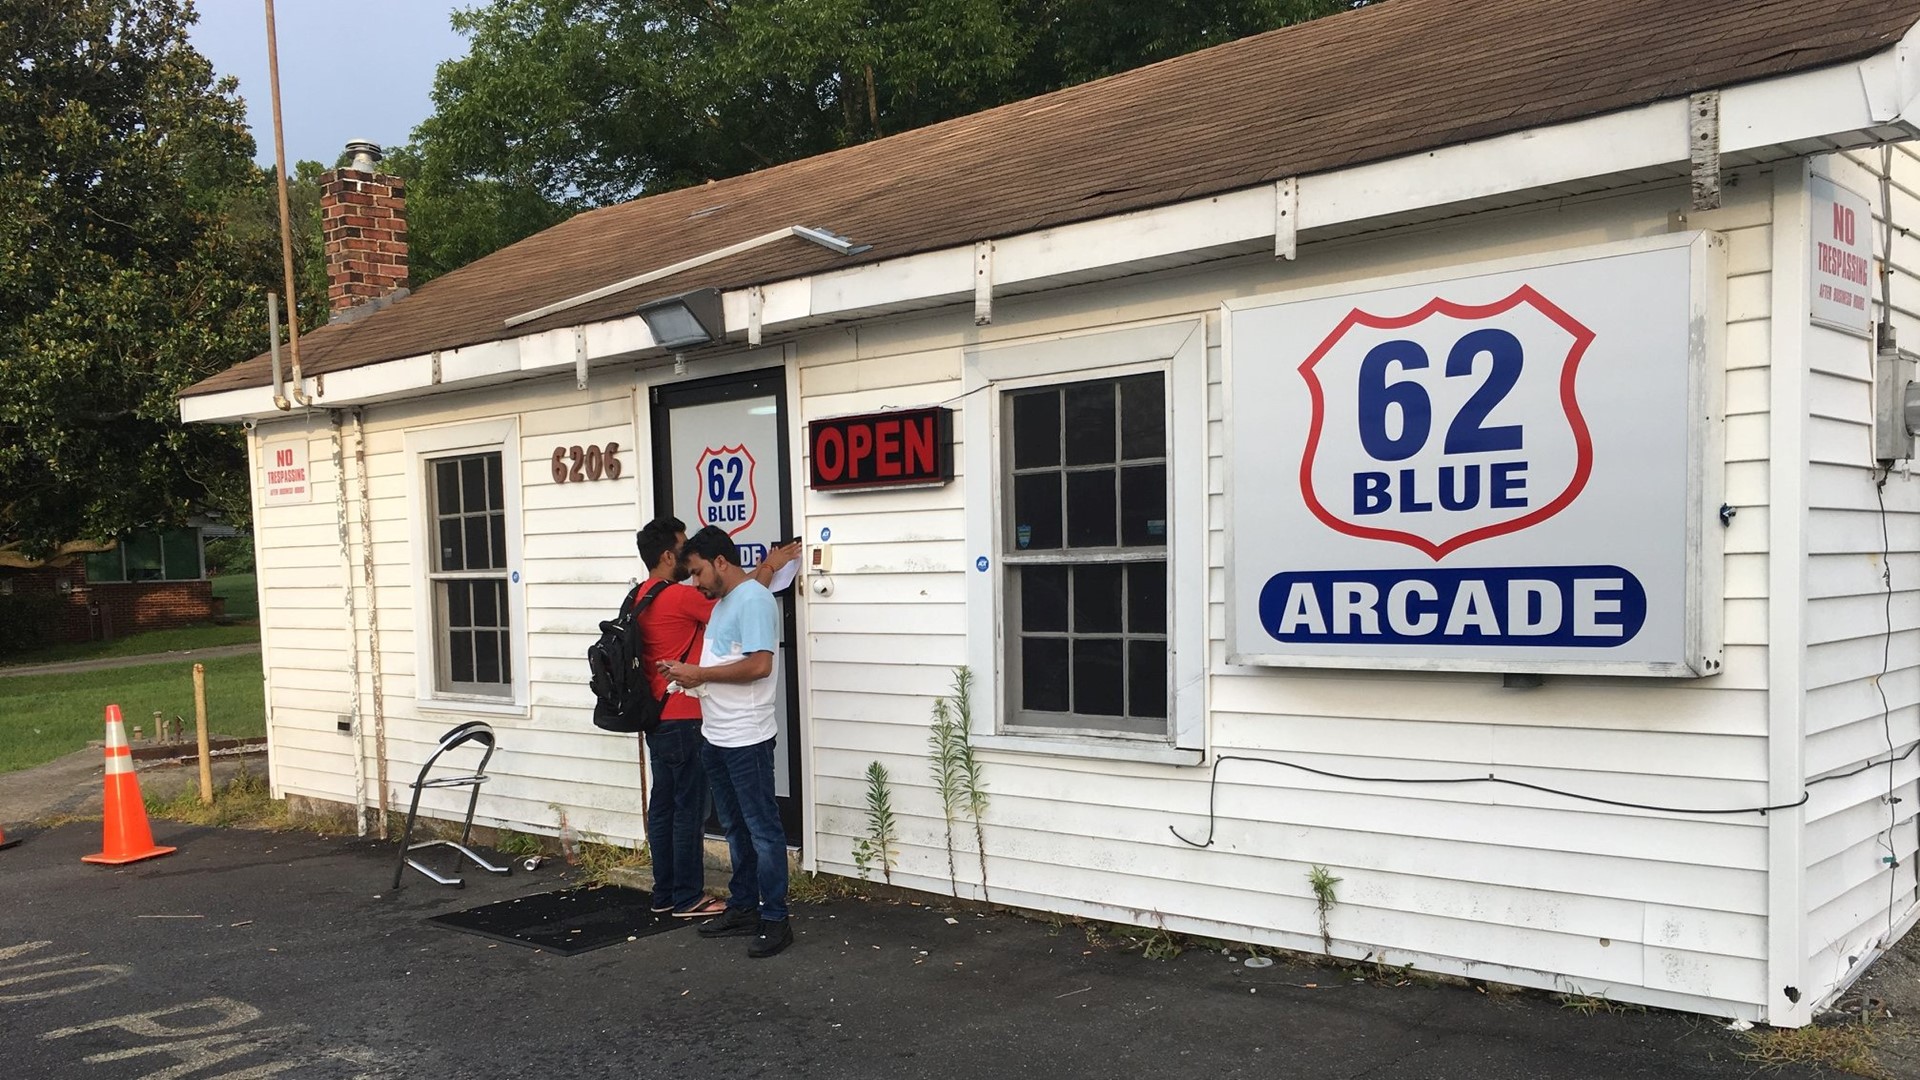 Randolph County Sheriff Greg Seabolt says community complaints started rolling in when 62 Blue Arcade opened in Trinity about three months ago.